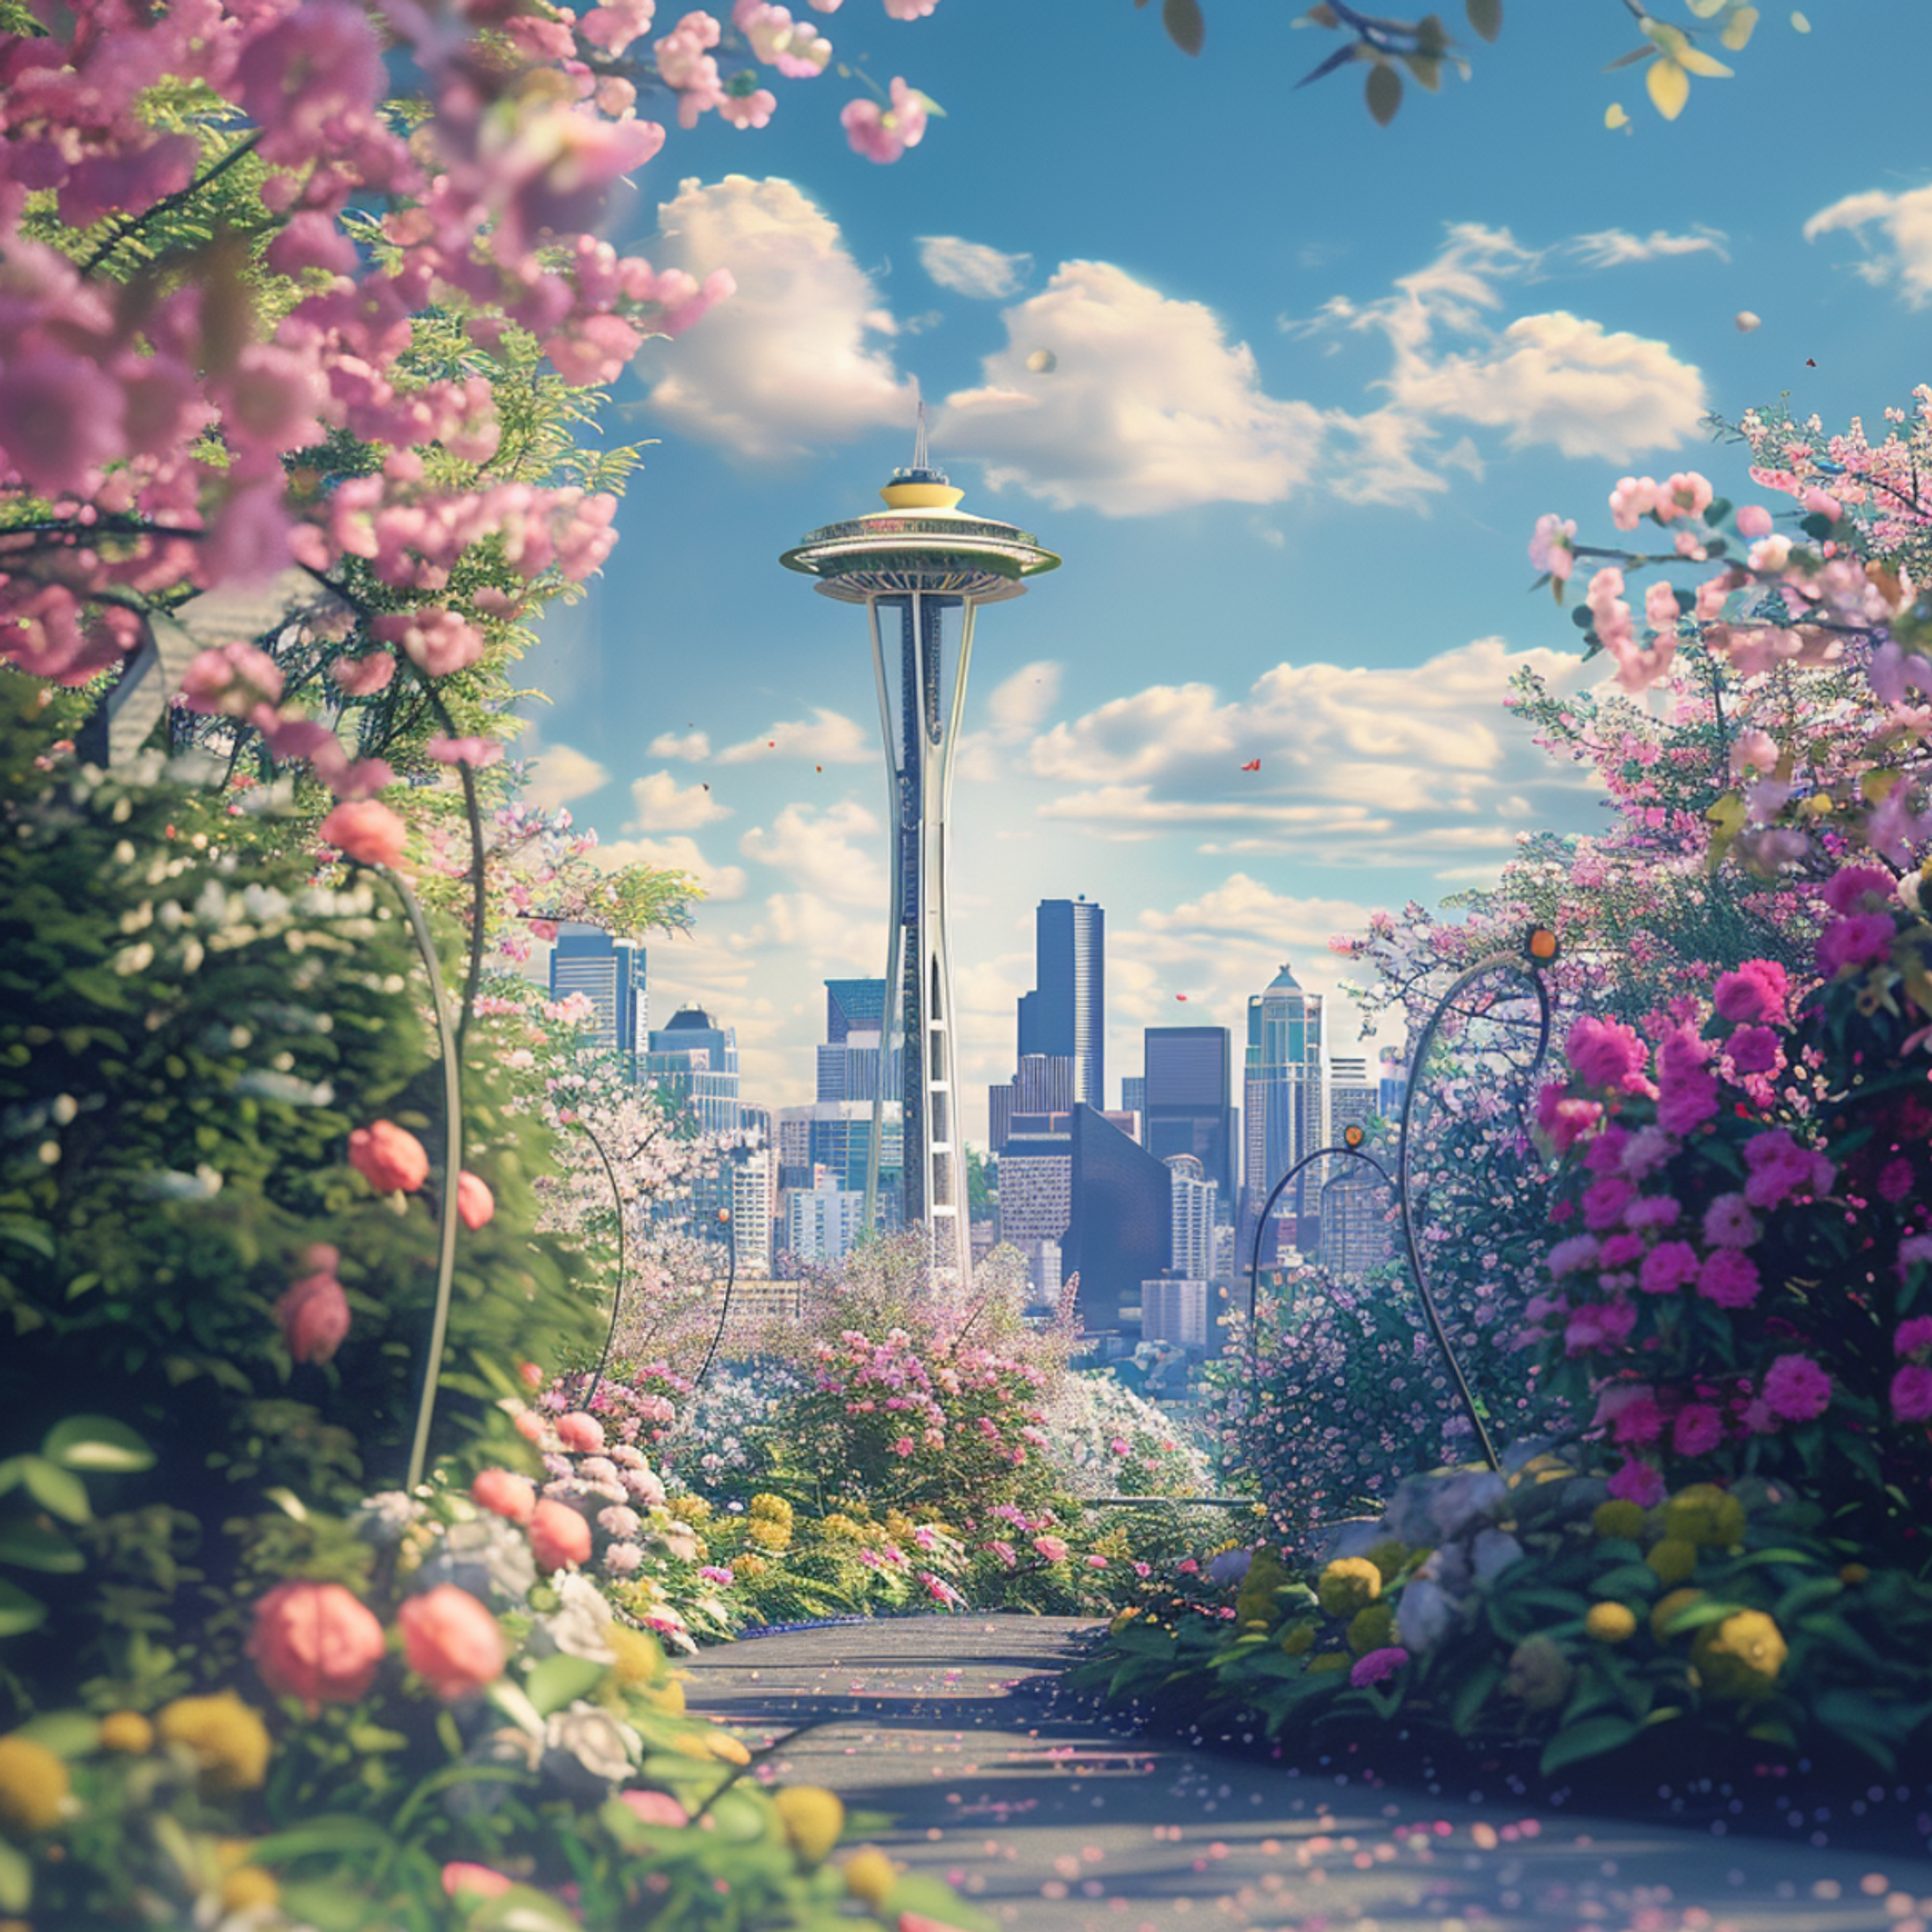 A picturesque pathway lined with an abundance of blooming pink and white flowers leads towards the iconic Space Needle, set against the Seattle skyline under a sunny sky dotted with fluffy clouds, capturing the essence of spring in Seattle, Washington.